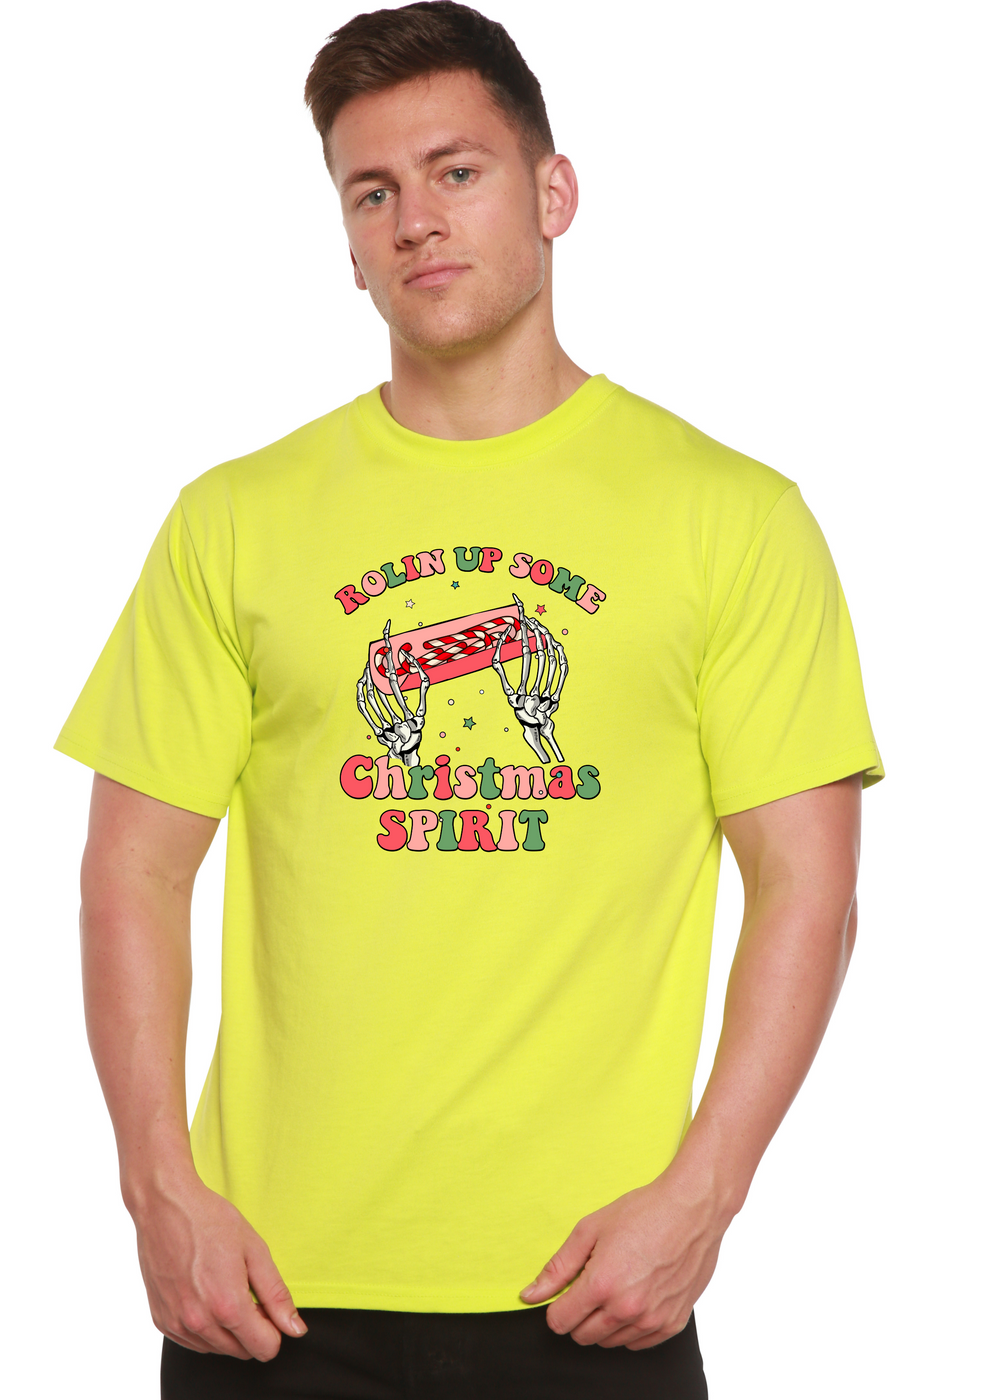 Rolin Up Some Christmas Spirit Unisex Graphic Bamboo T-Shirt lime punch